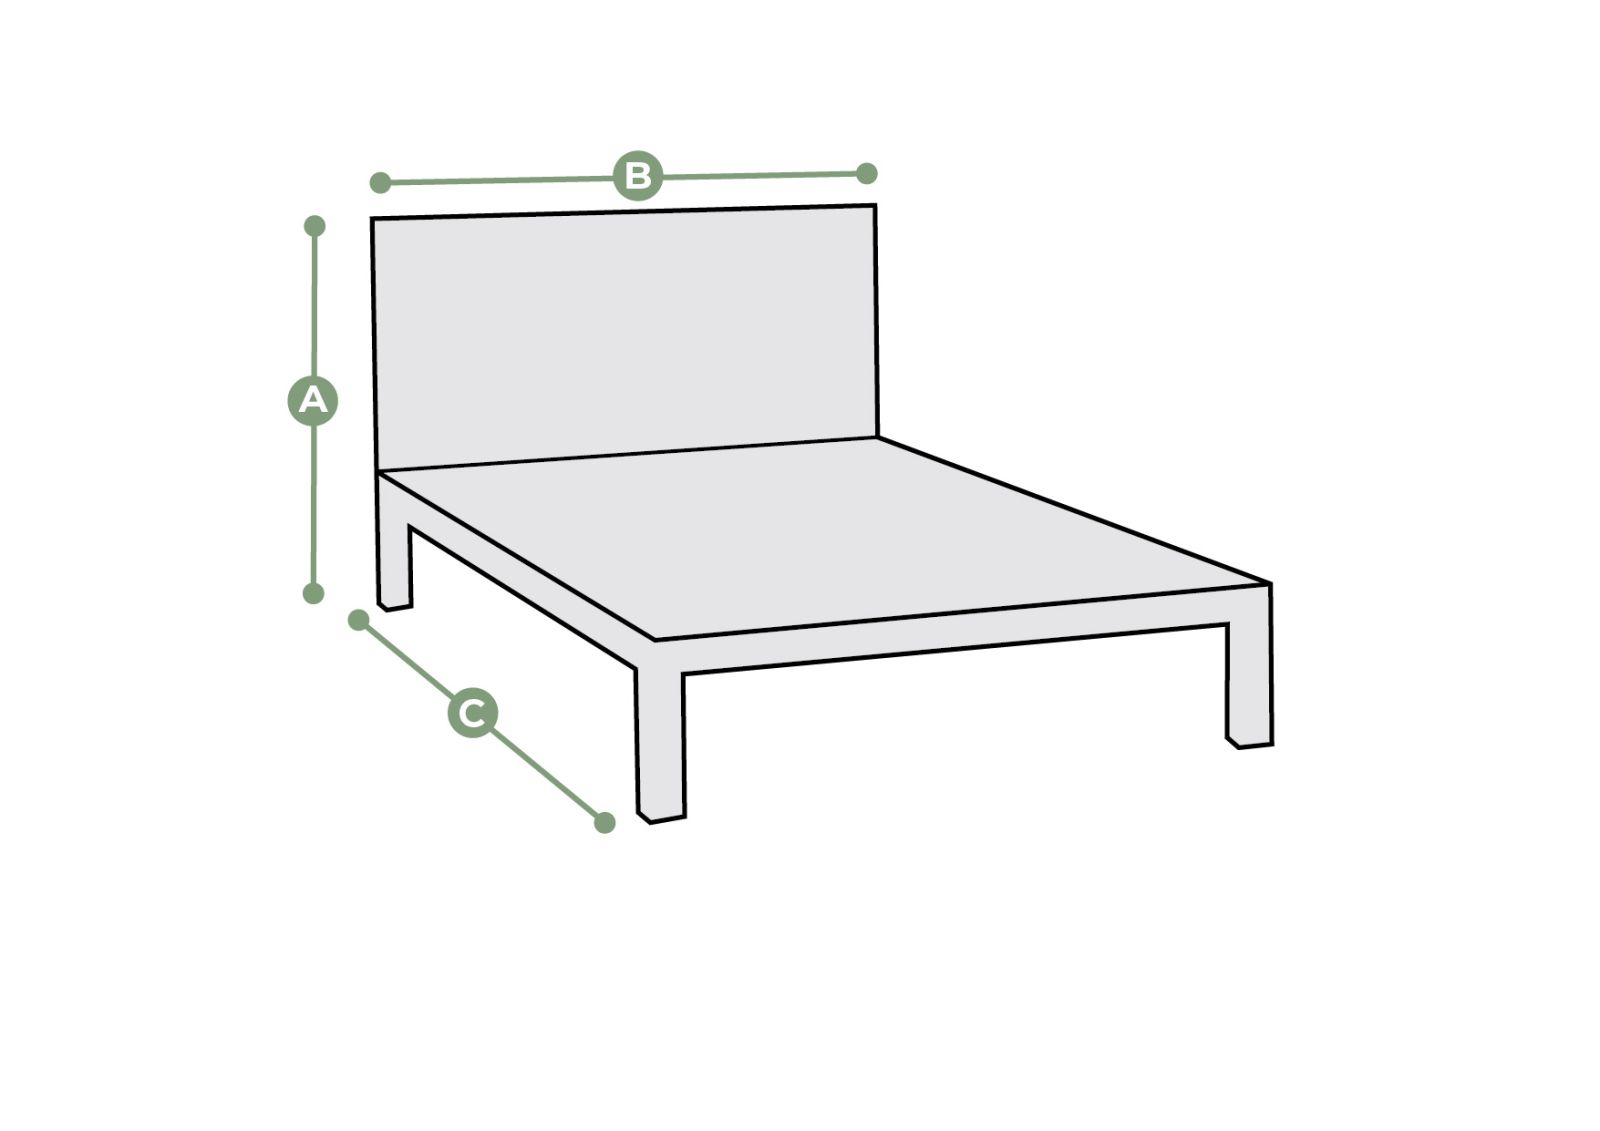 Amersham King-Size Bed Dimensions